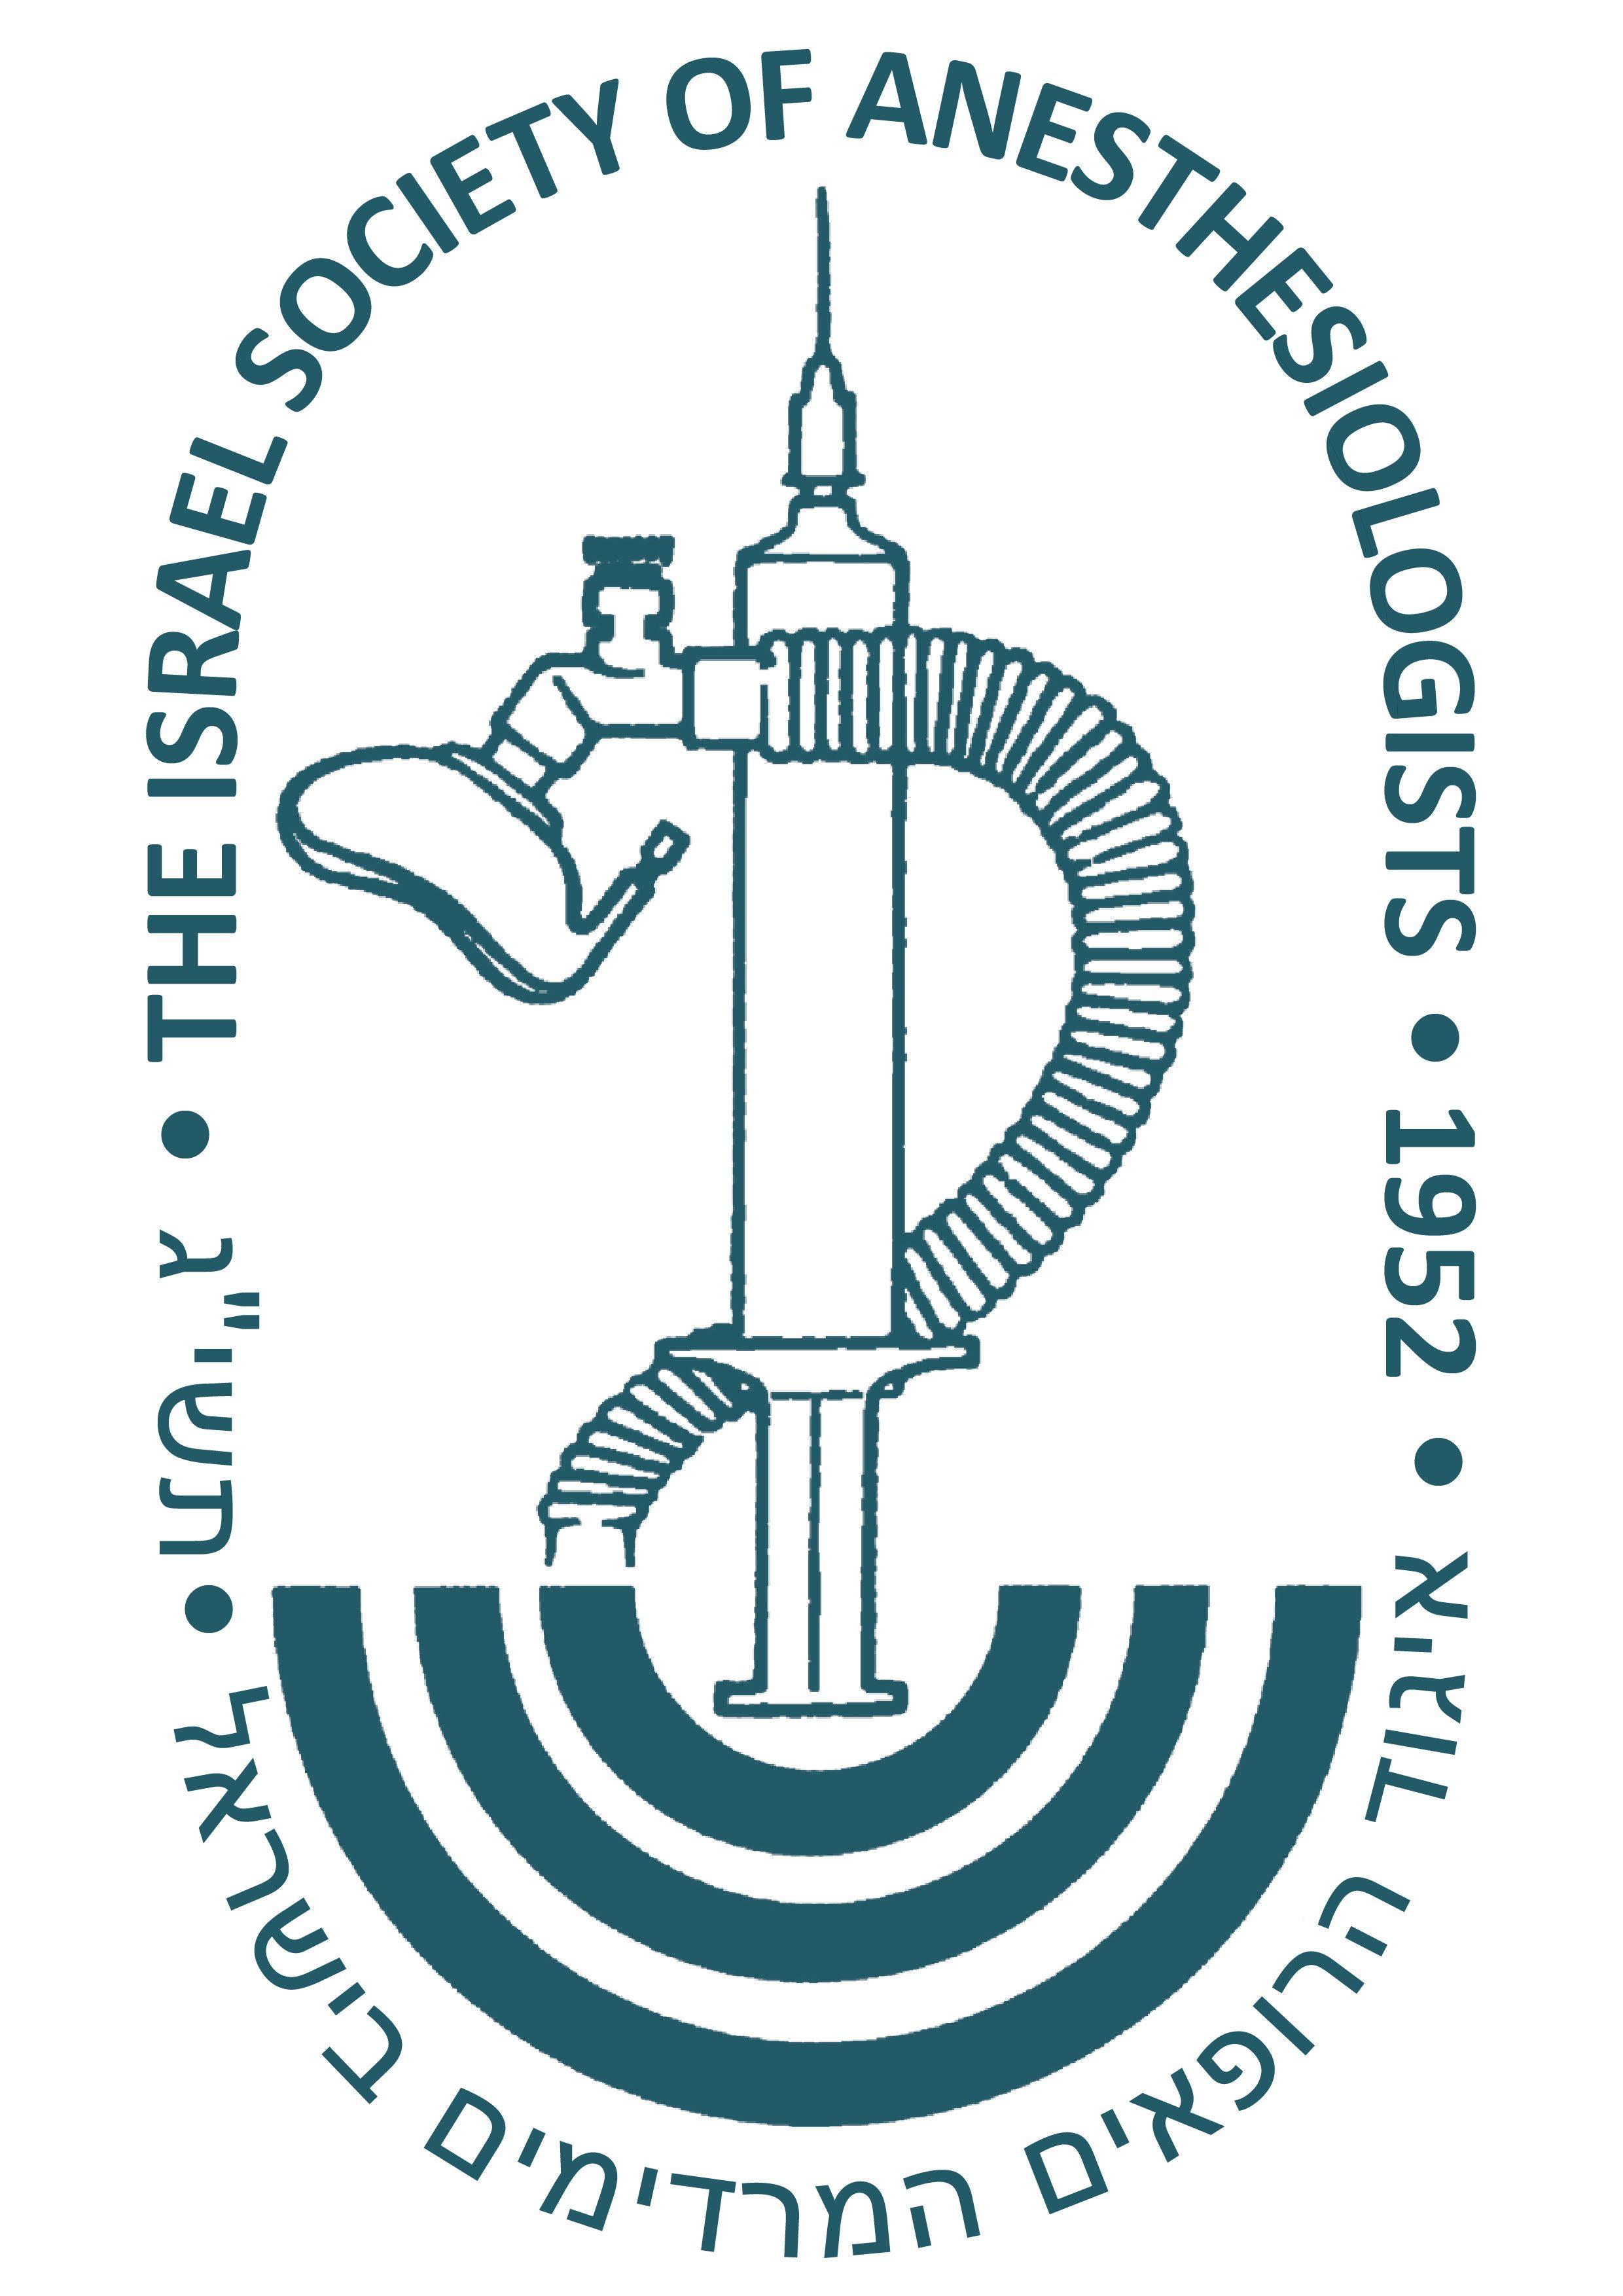 Anesthesiologist Logo - World Federation Of Societies of Anaesthesiologists - ISRAEL ...